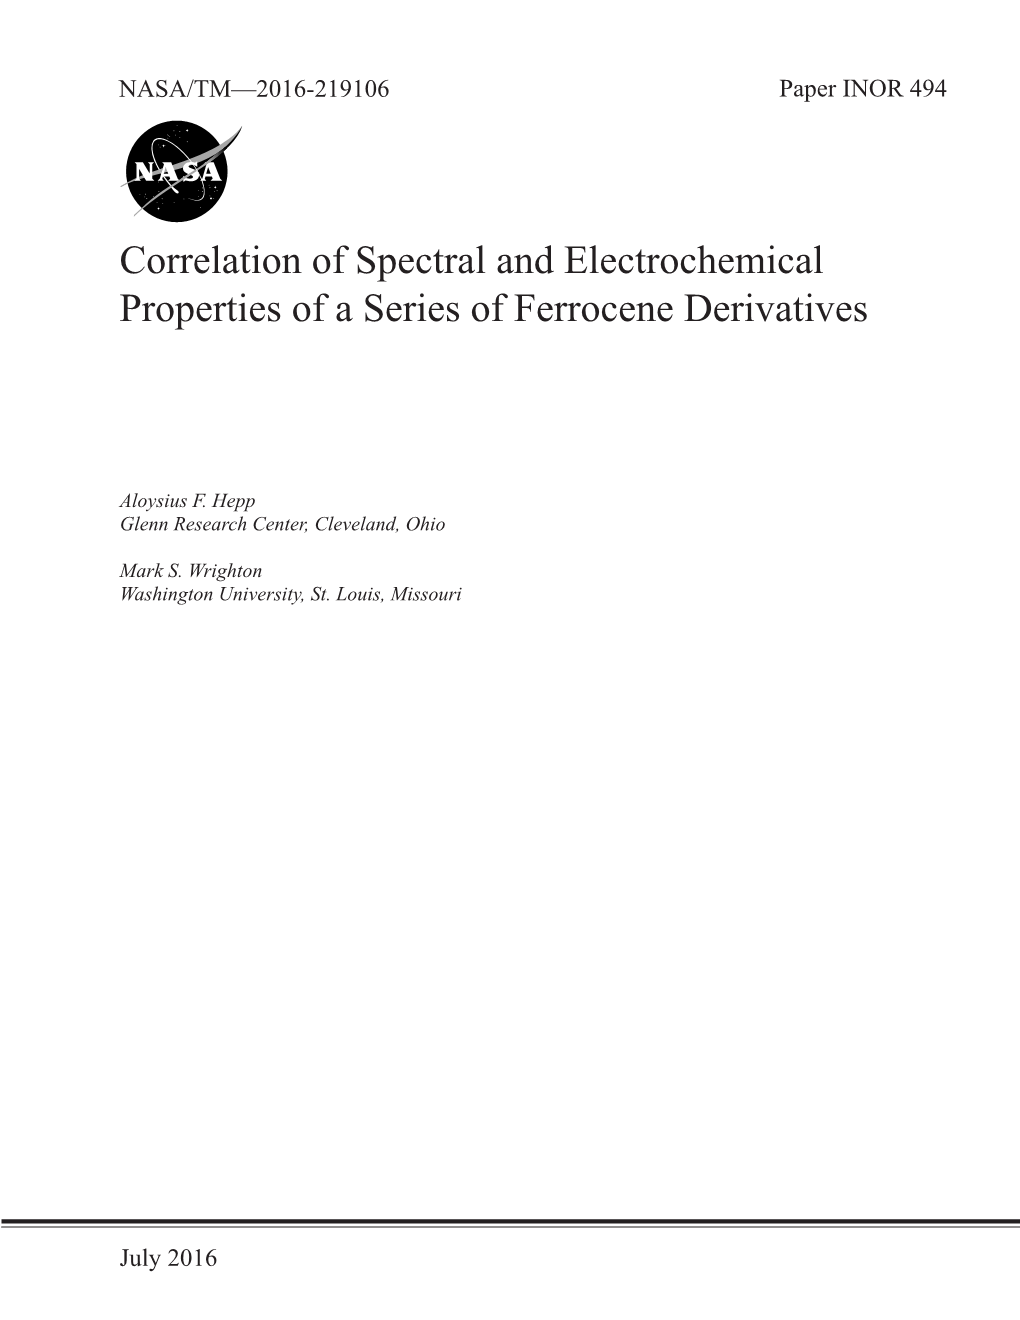 Correlation of Spectral and Electrochemical Properties of a Series of Ferrocene Derivatives